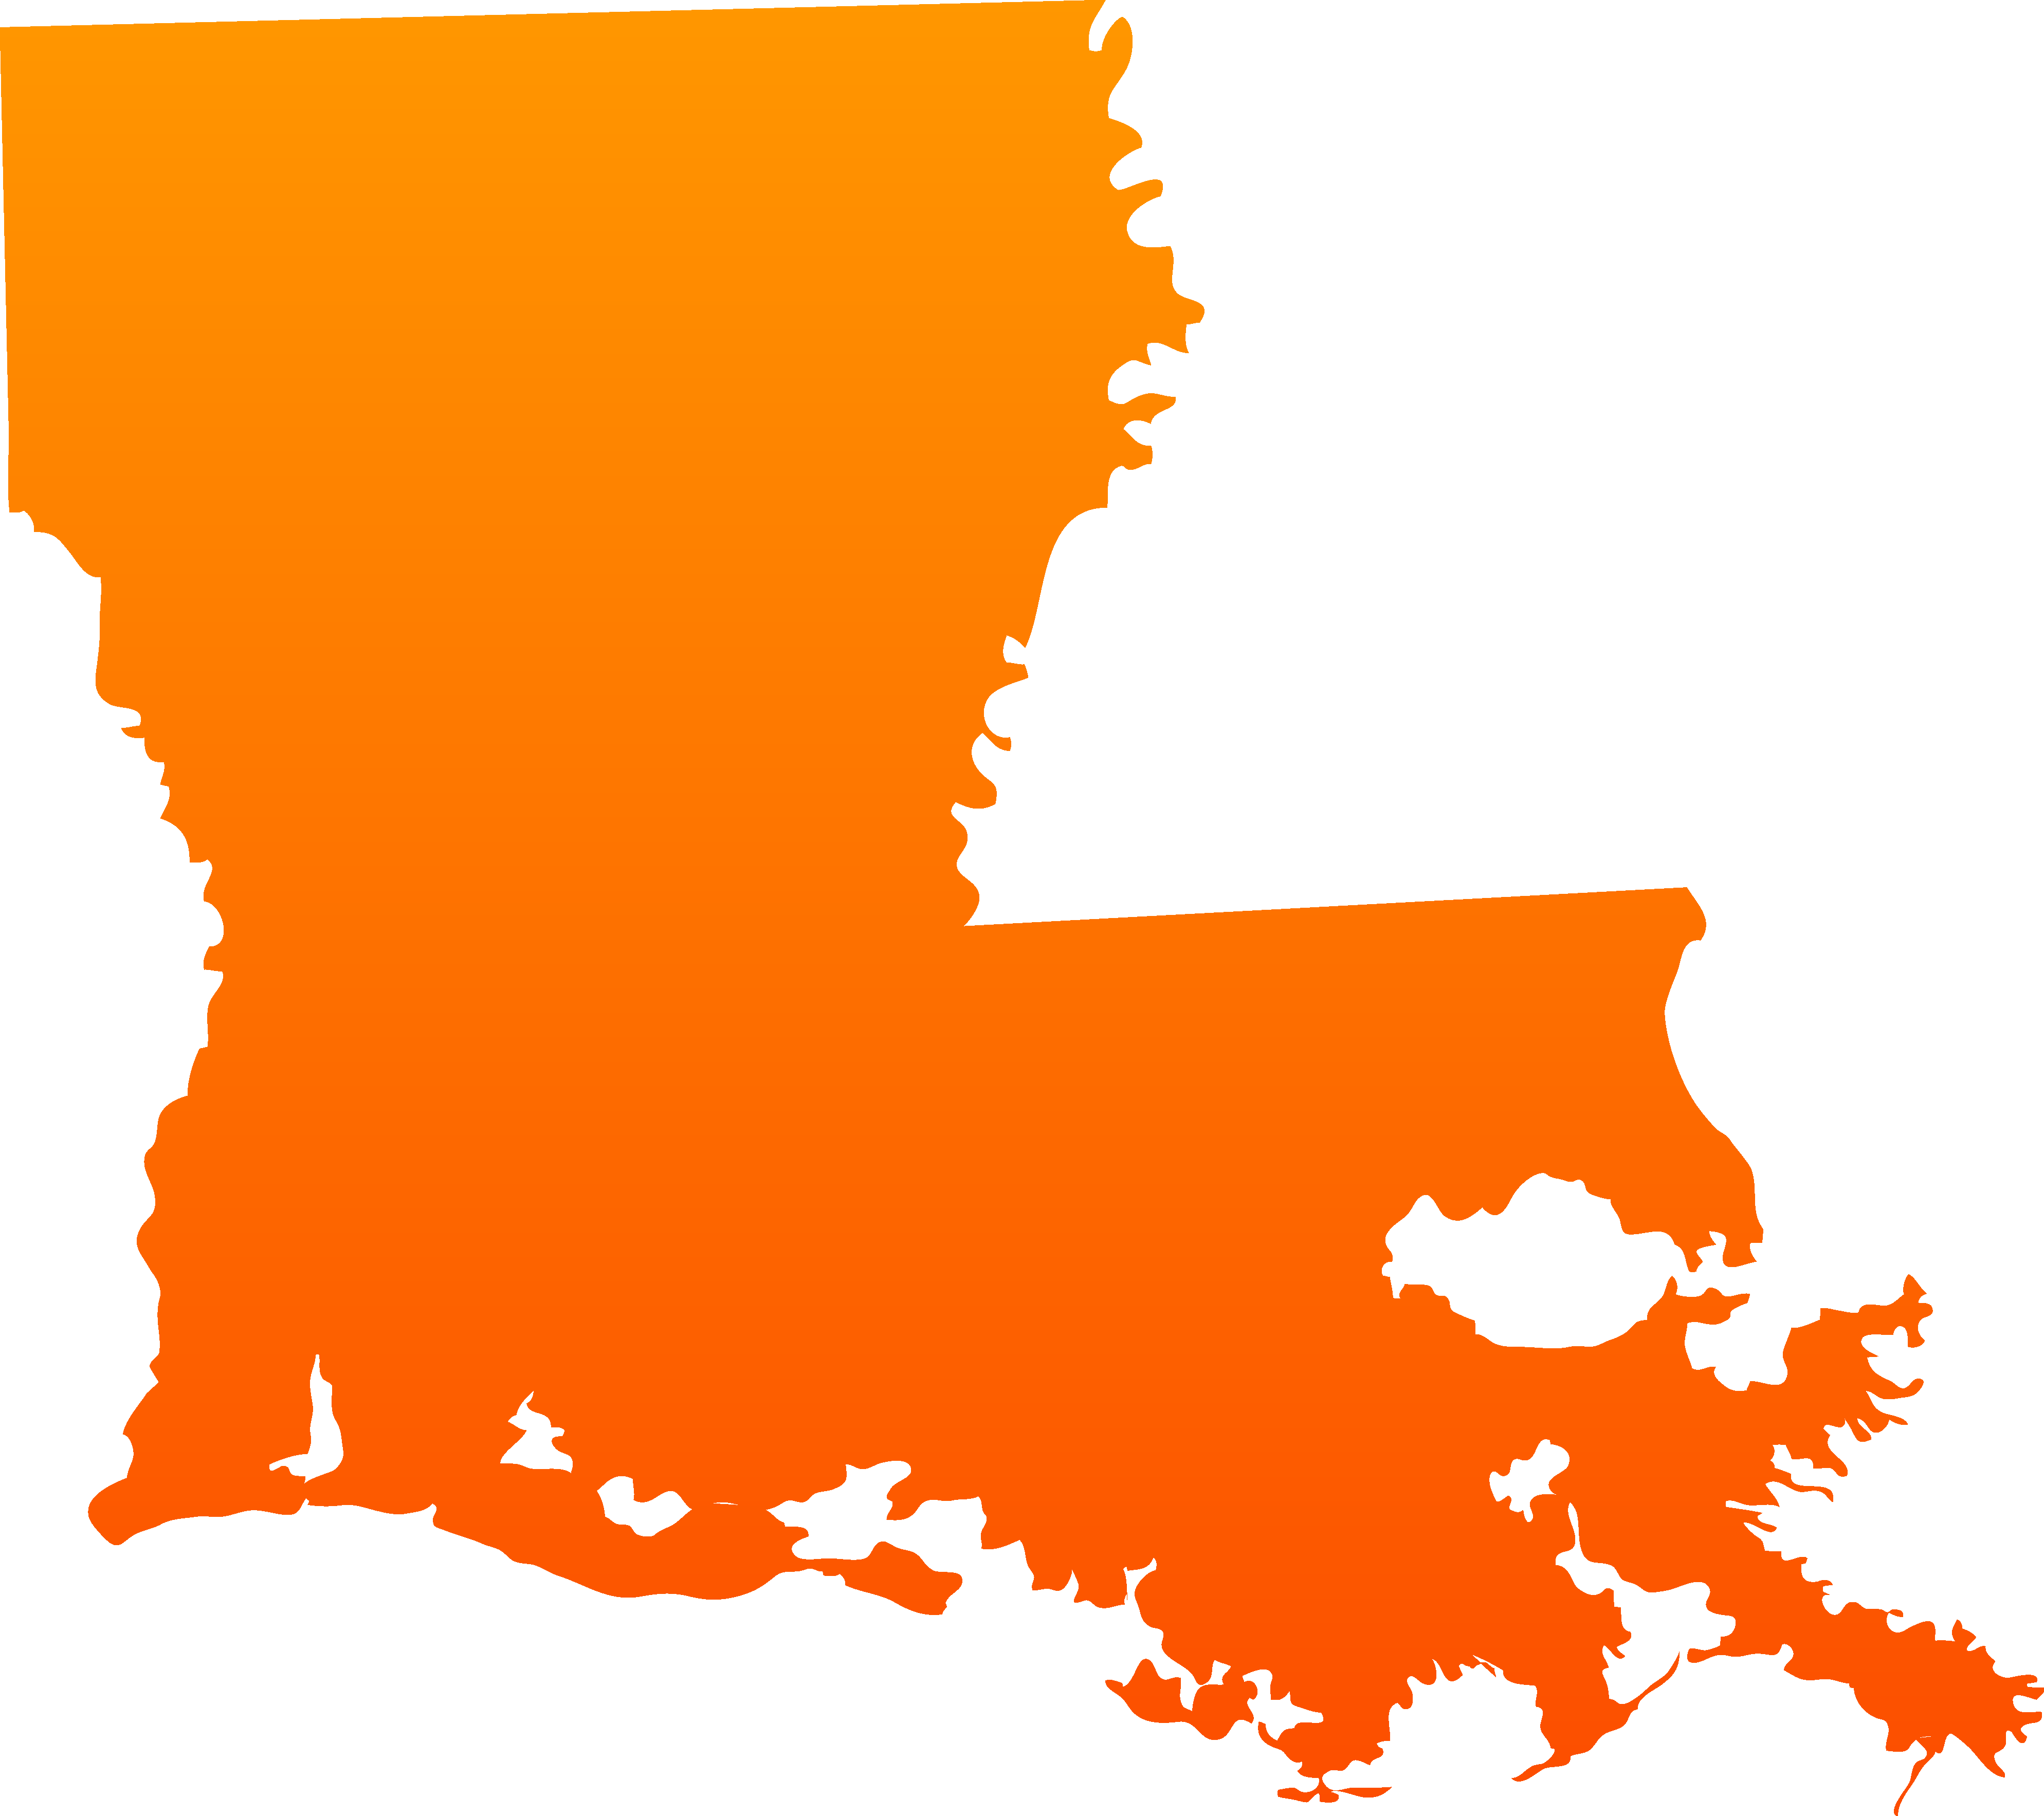 How to Get an LLC in Louisiana?